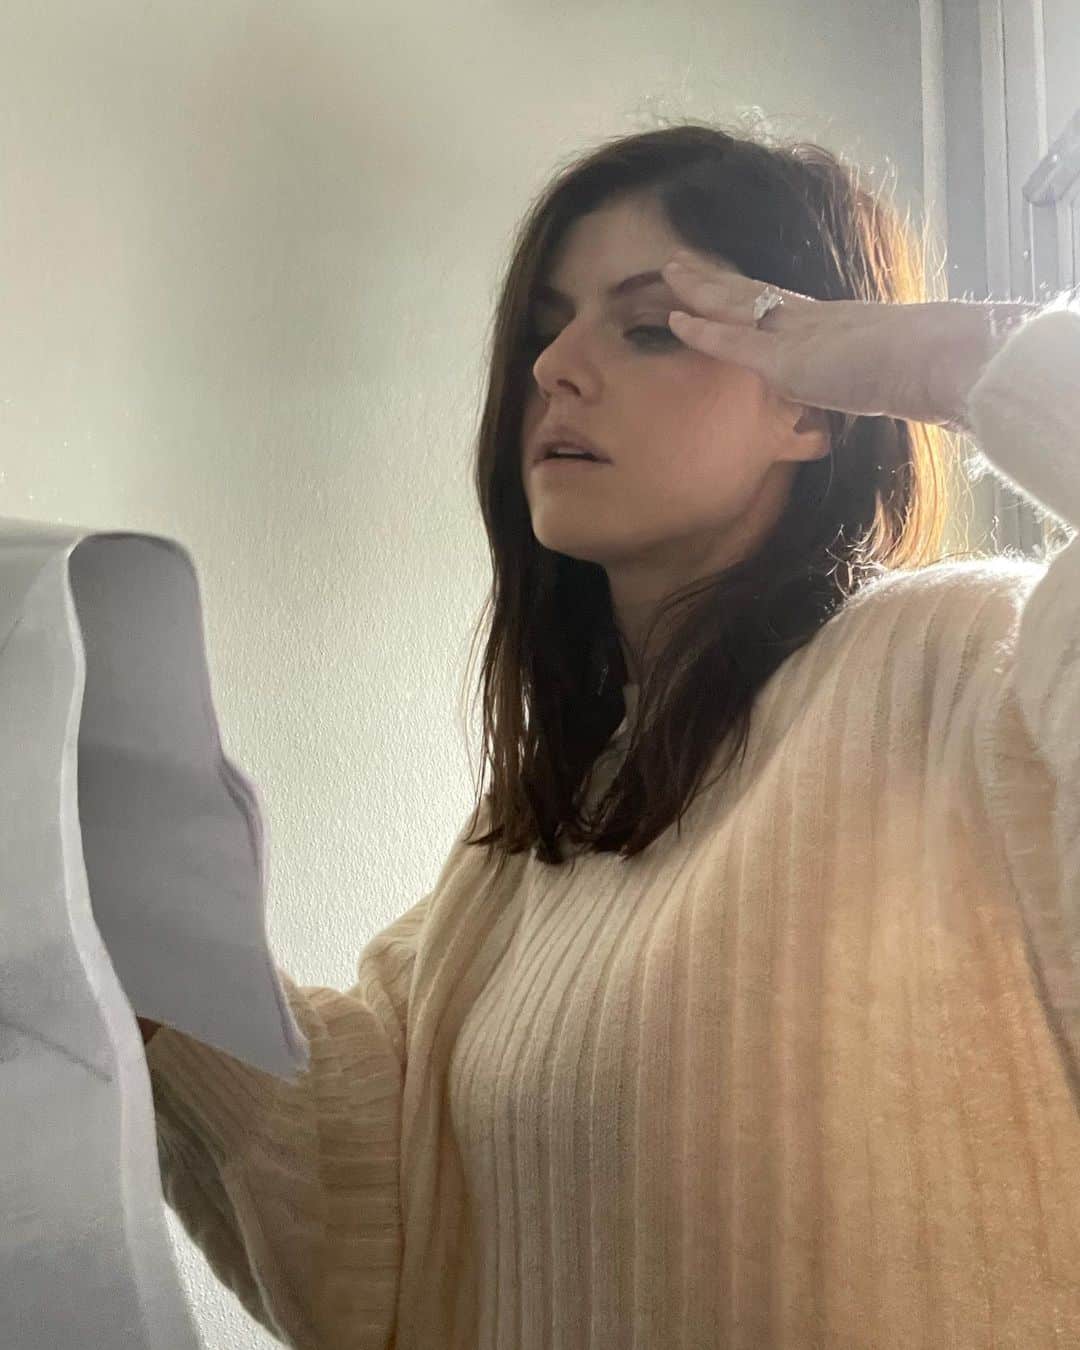 Alexandra Daddario Cutely Rehearsing her Lines for the Movie “Wildflower”